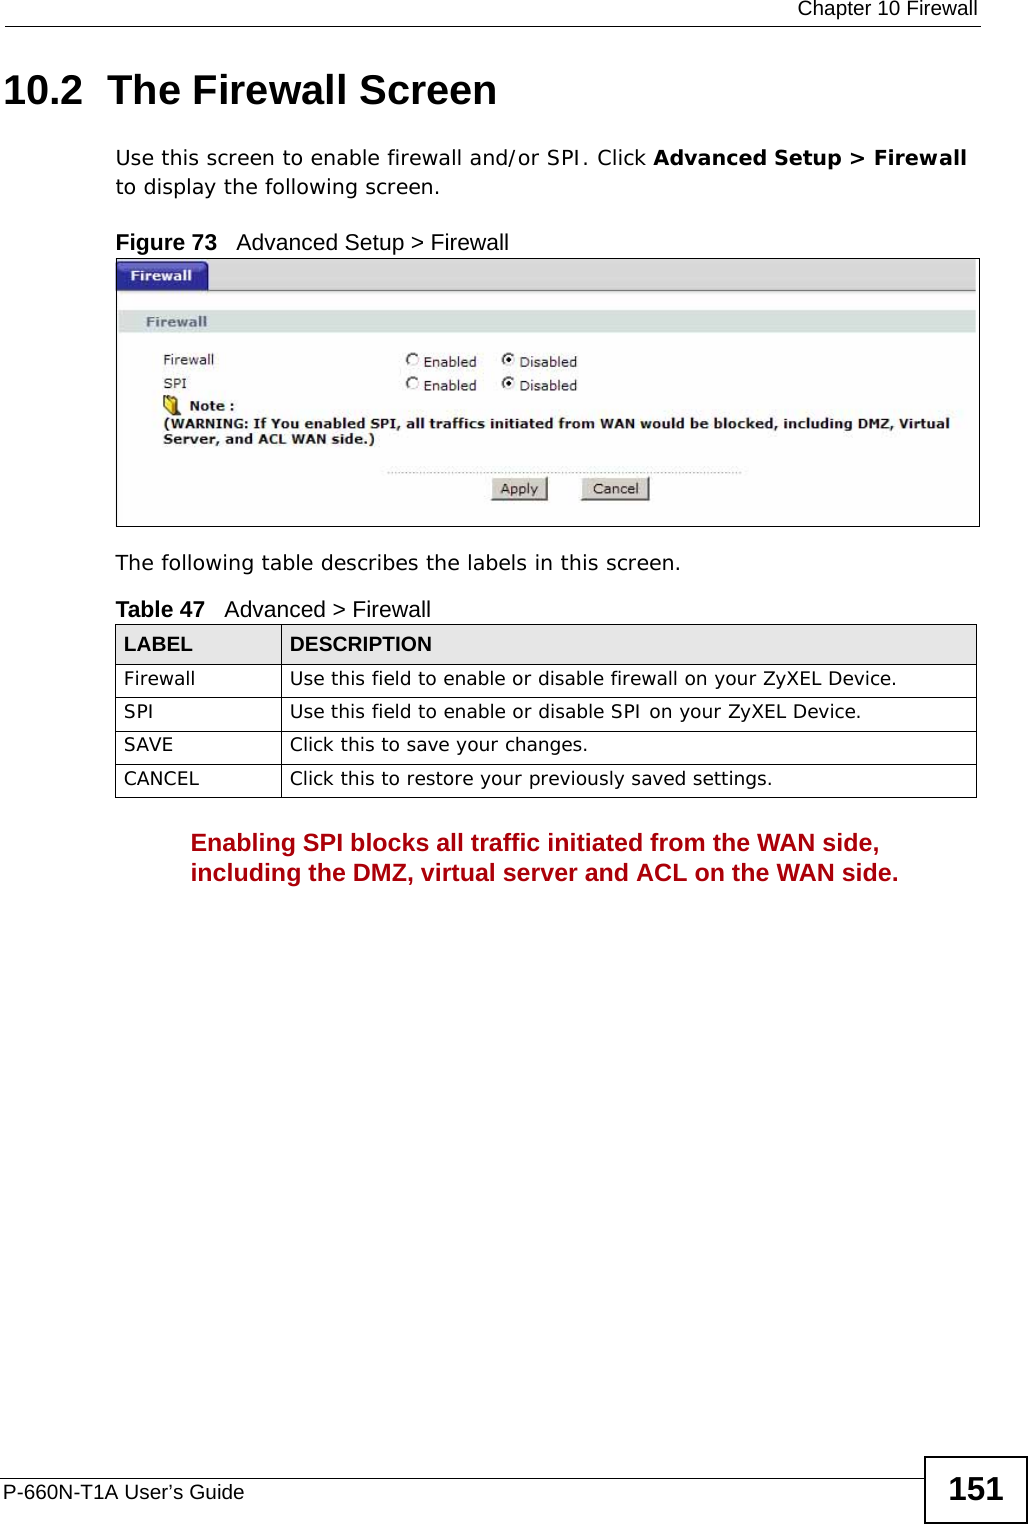  Chapter 10 FirewallP-660N-T1A User’s Guide 15110.2  The Firewall ScreenUse this screen to enable firewall and/or SPI. Click Advanced Setup &gt; Firewall to display the following screen.Figure 73   Advanced Setup &gt; FirewallThe following table describes the labels in this screen.Enabling SPI blocks all traffic initiated from the WAN side, including the DMZ, virtual server and ACL on the WAN side.Table 47   Advanced &gt; FirewallLABEL DESCRIPTIONFirewall Use this field to enable or disable firewall on your ZyXEL Device.SPI Use this field to enable or disable SPI on your ZyXEL Device.SAVE Click this to save your changes.CANCEL Click this to restore your previously saved settings.